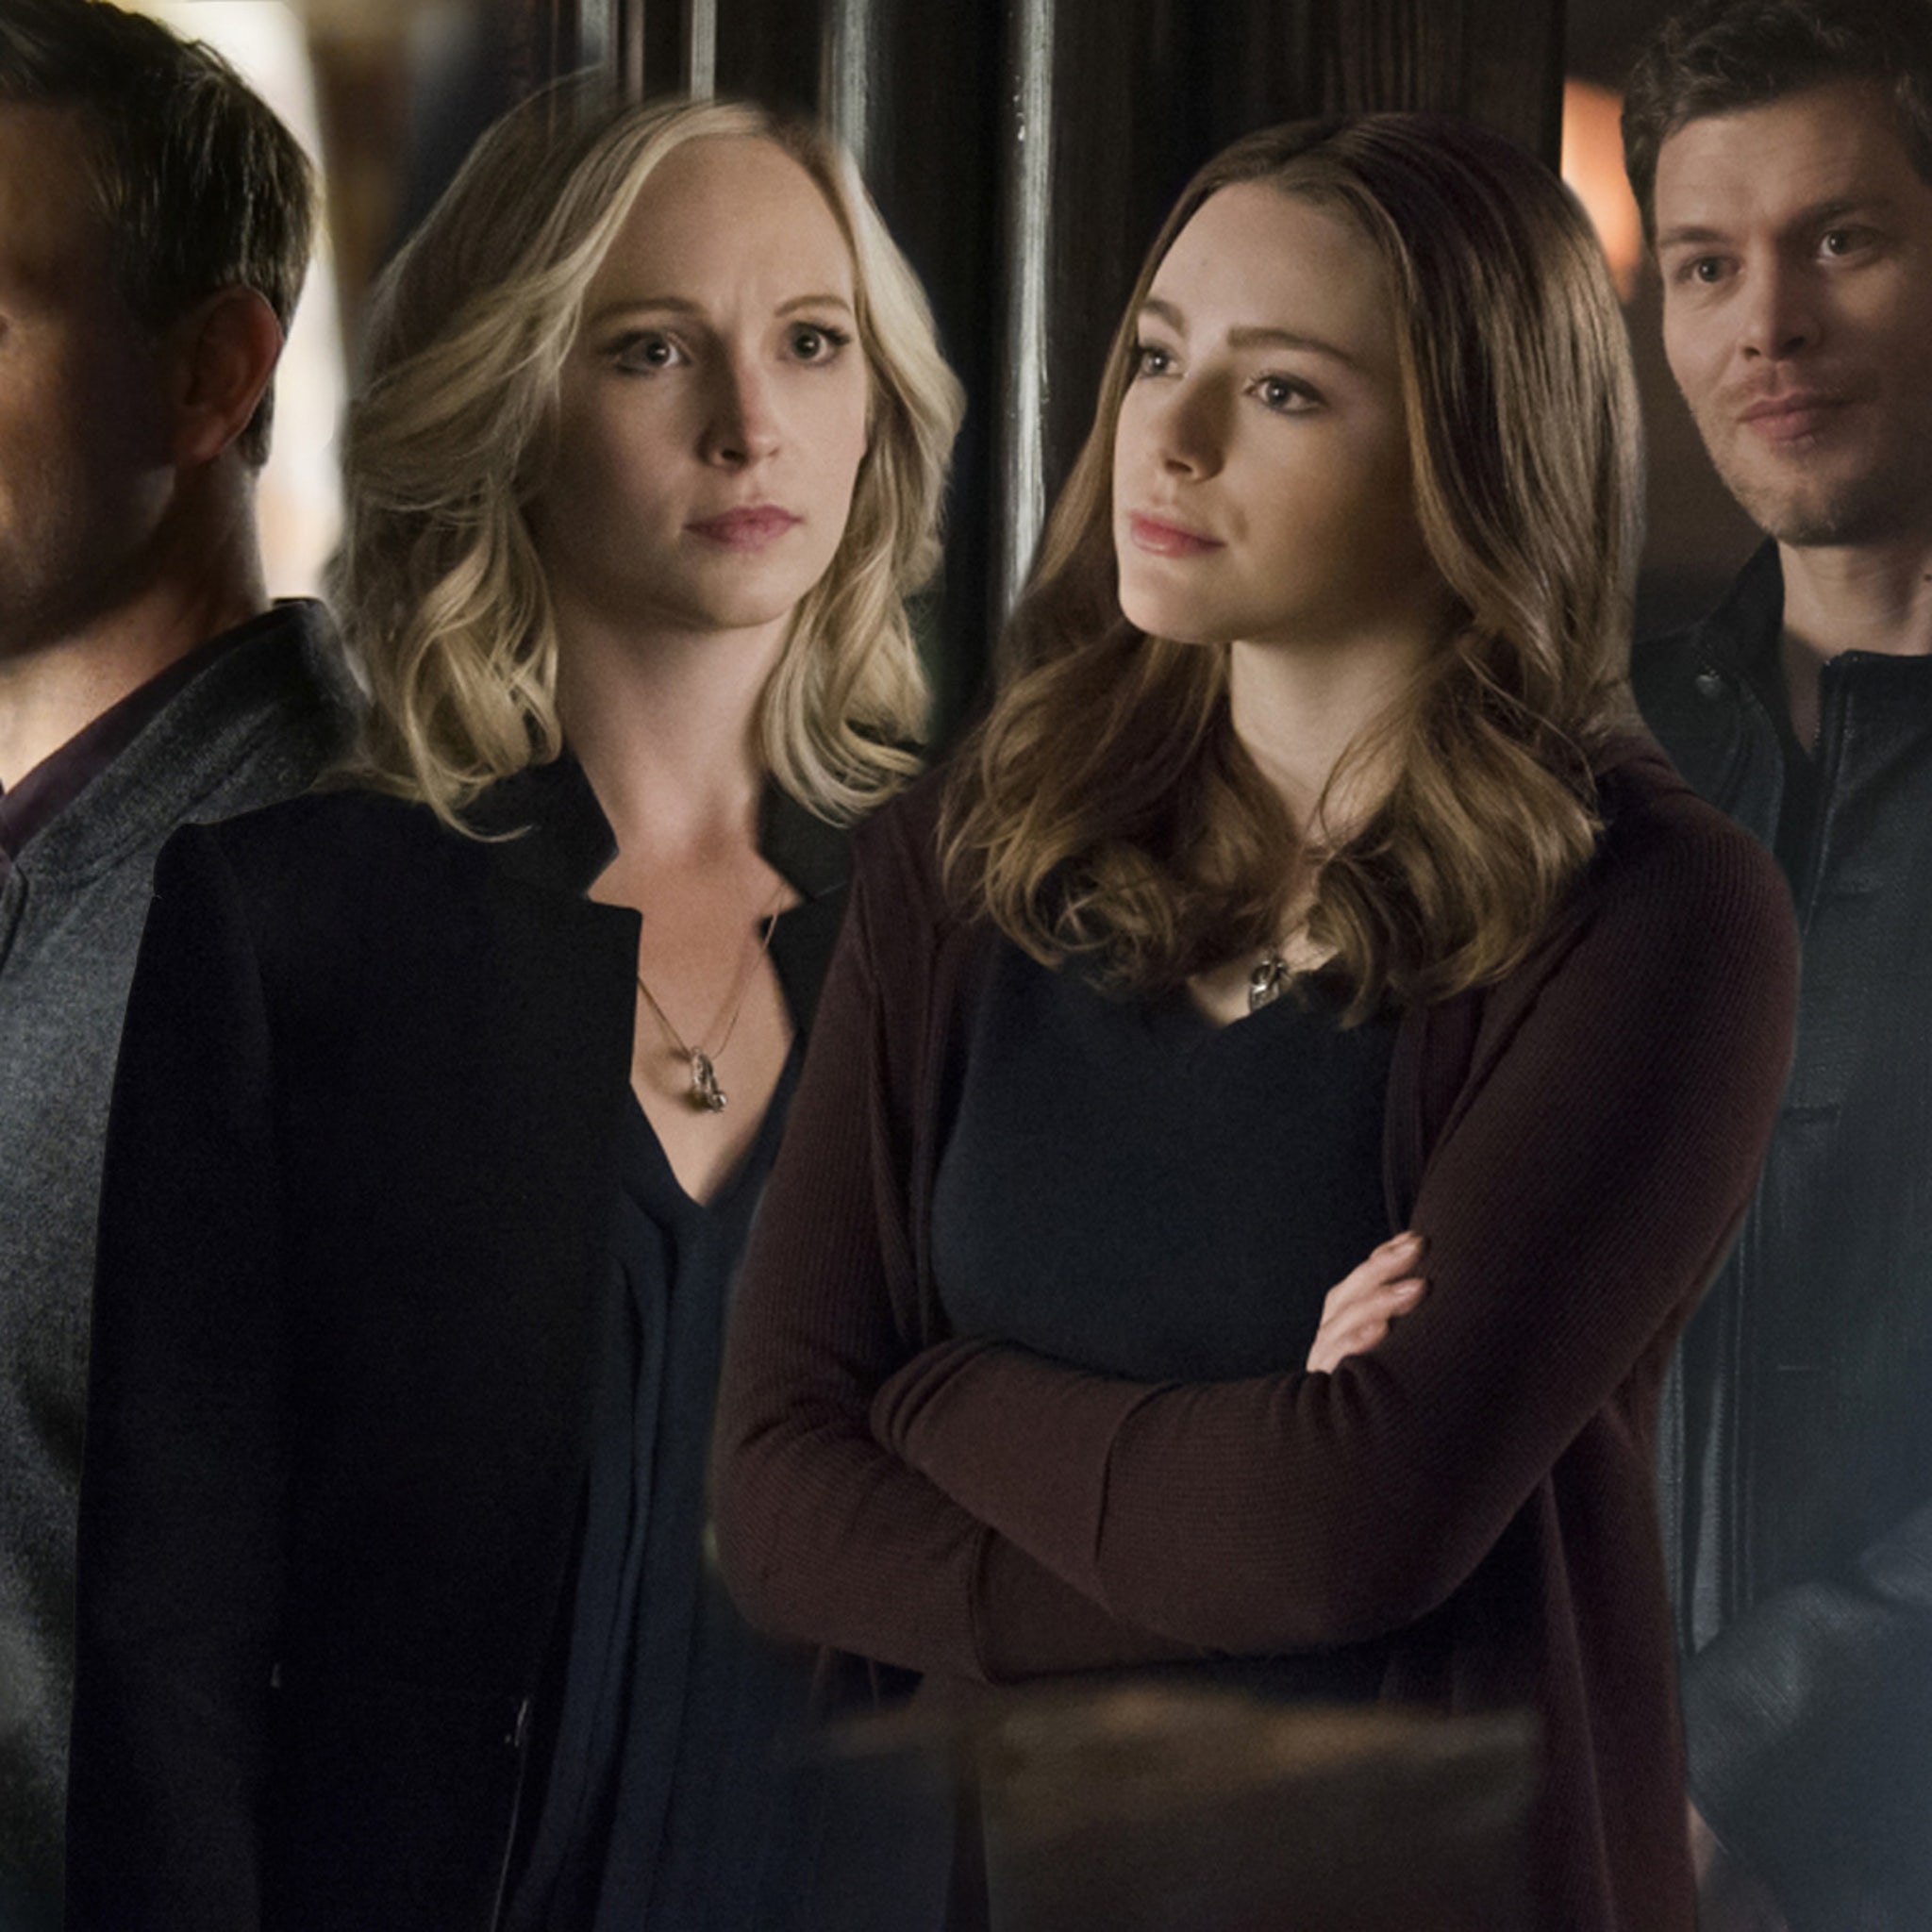 Originals' Teases 'Legacies': Julie Plec on What Spinoff Means for